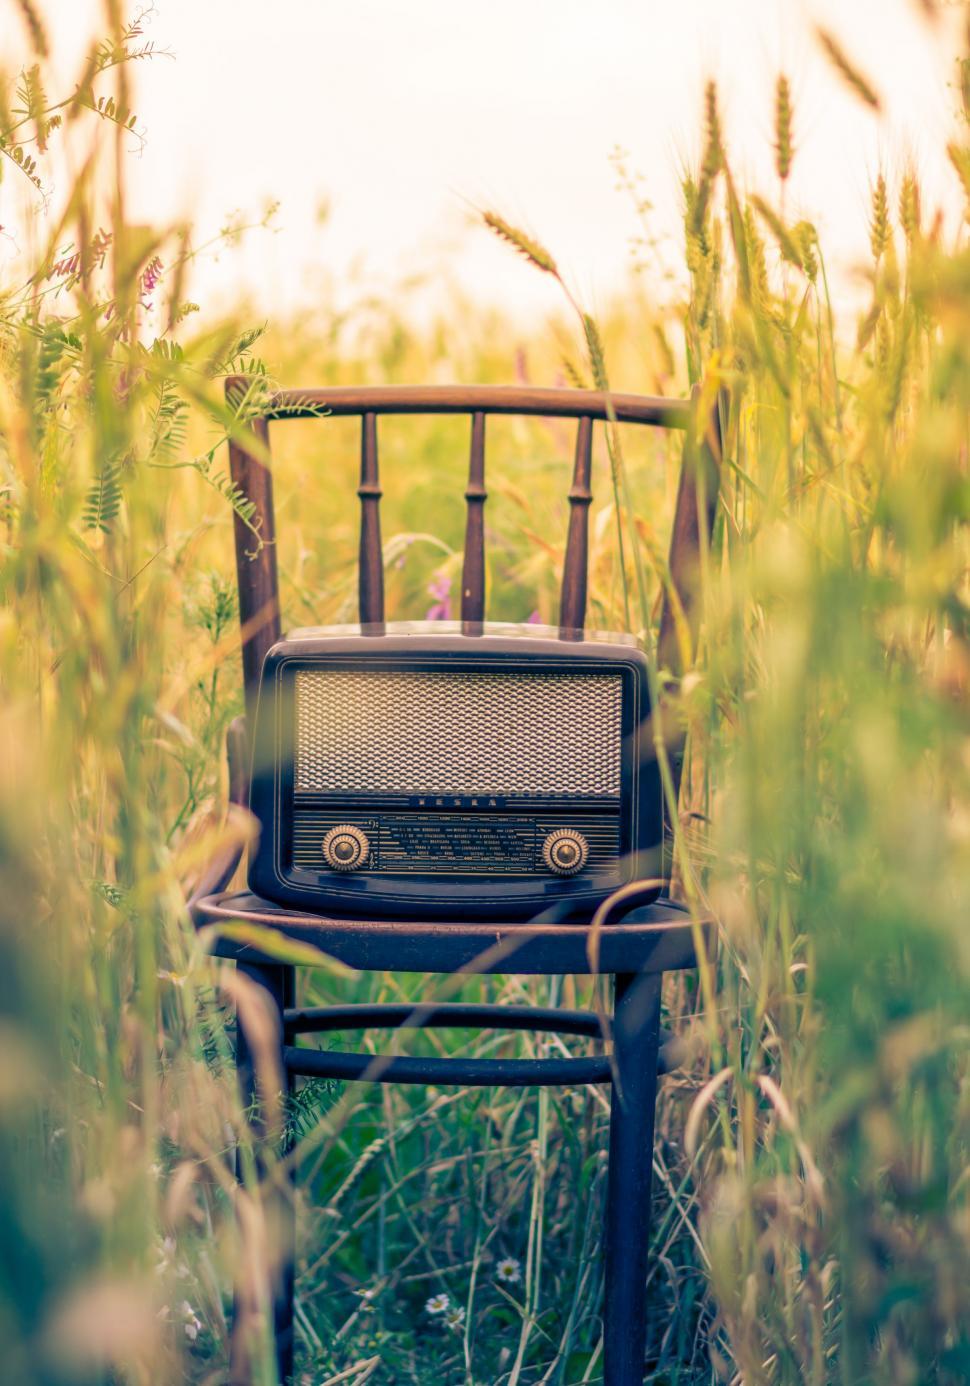 Free Image of Old Radio Resting on Chair in Field 